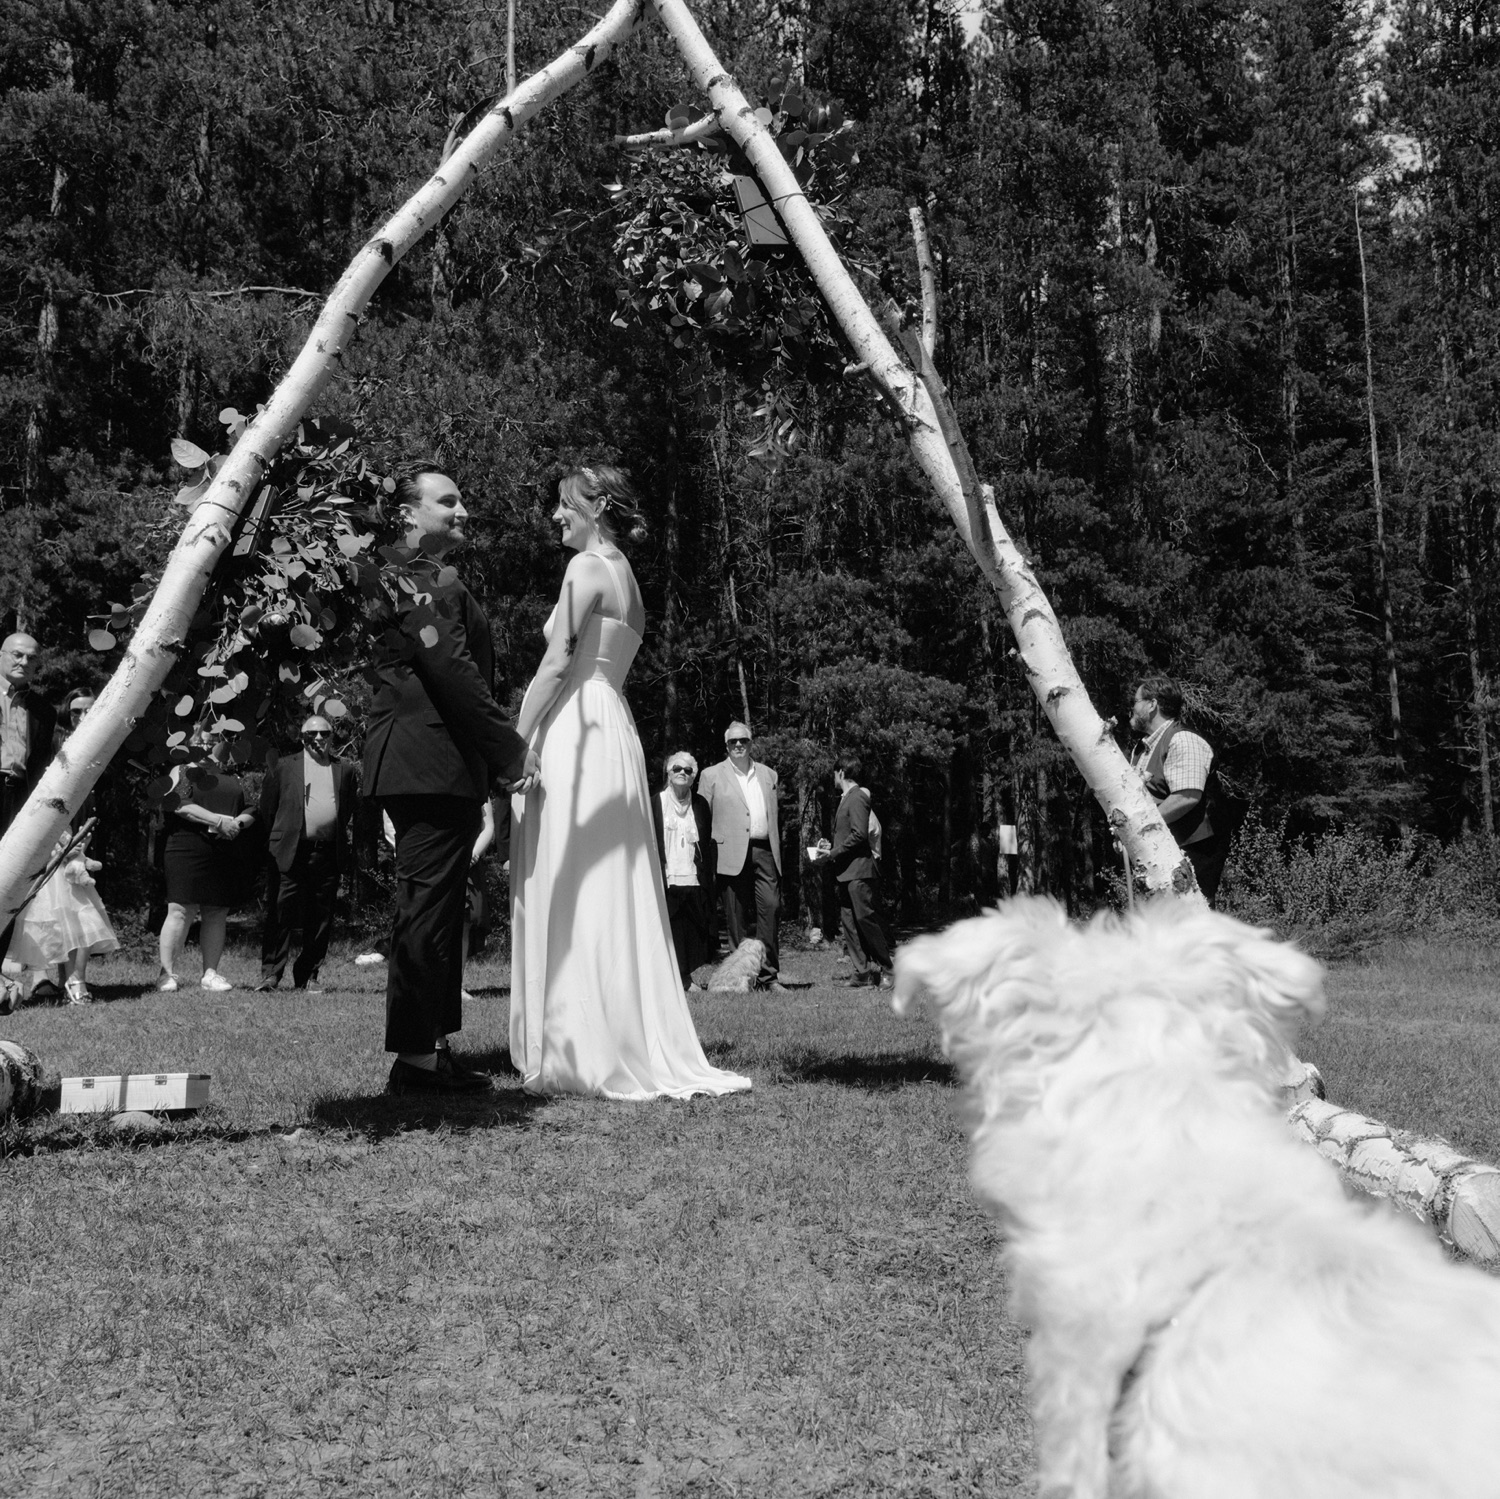 White schnauzer looking on as his owner's are married beneath a custom birch branch altar